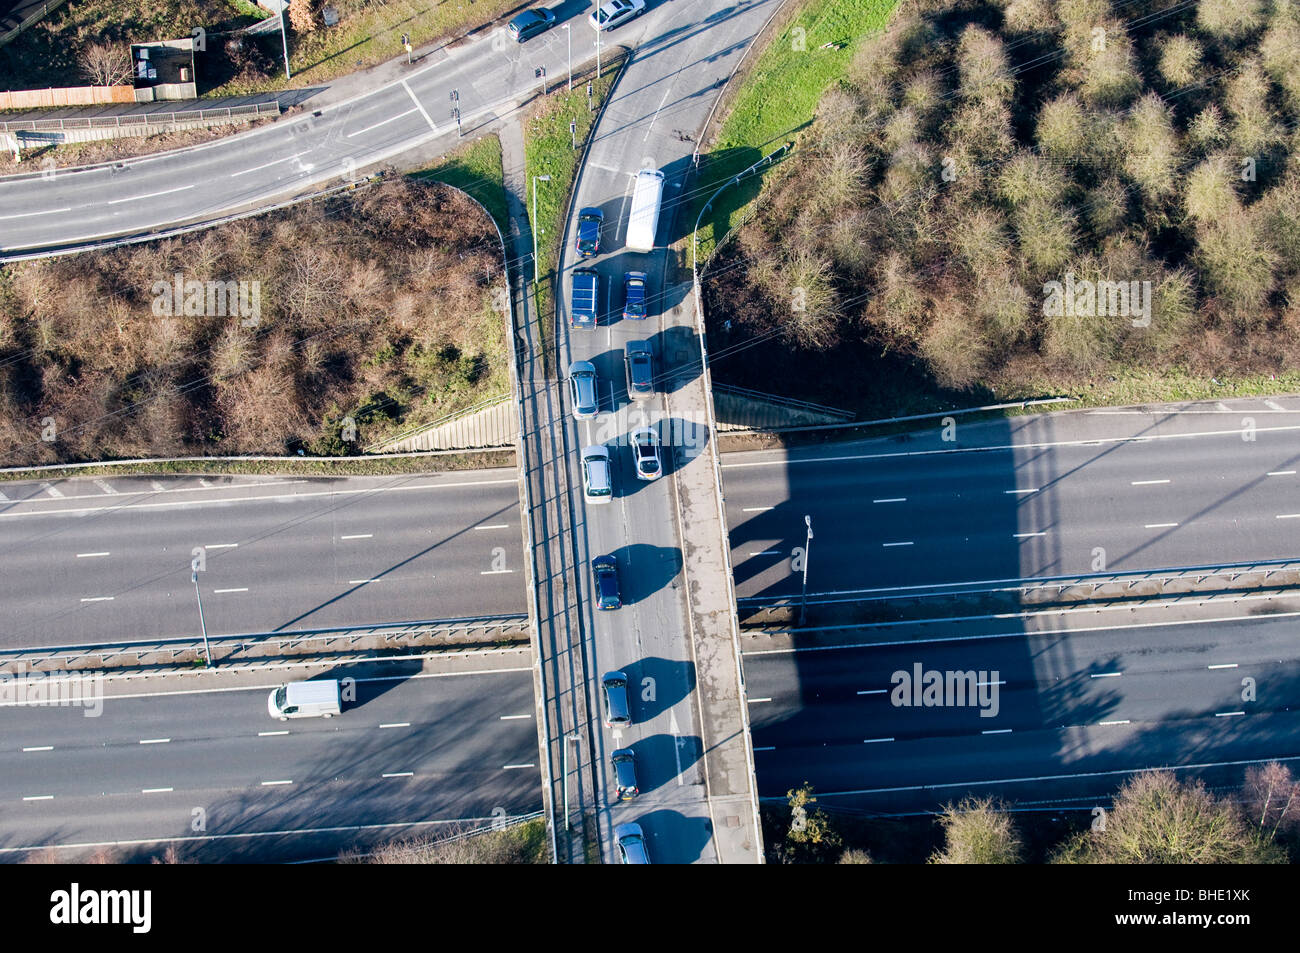 AERIAL VIEW OF CARS ON A ROAD ABOVE THE M25 MOTORWAY Stock Photo - Alamy